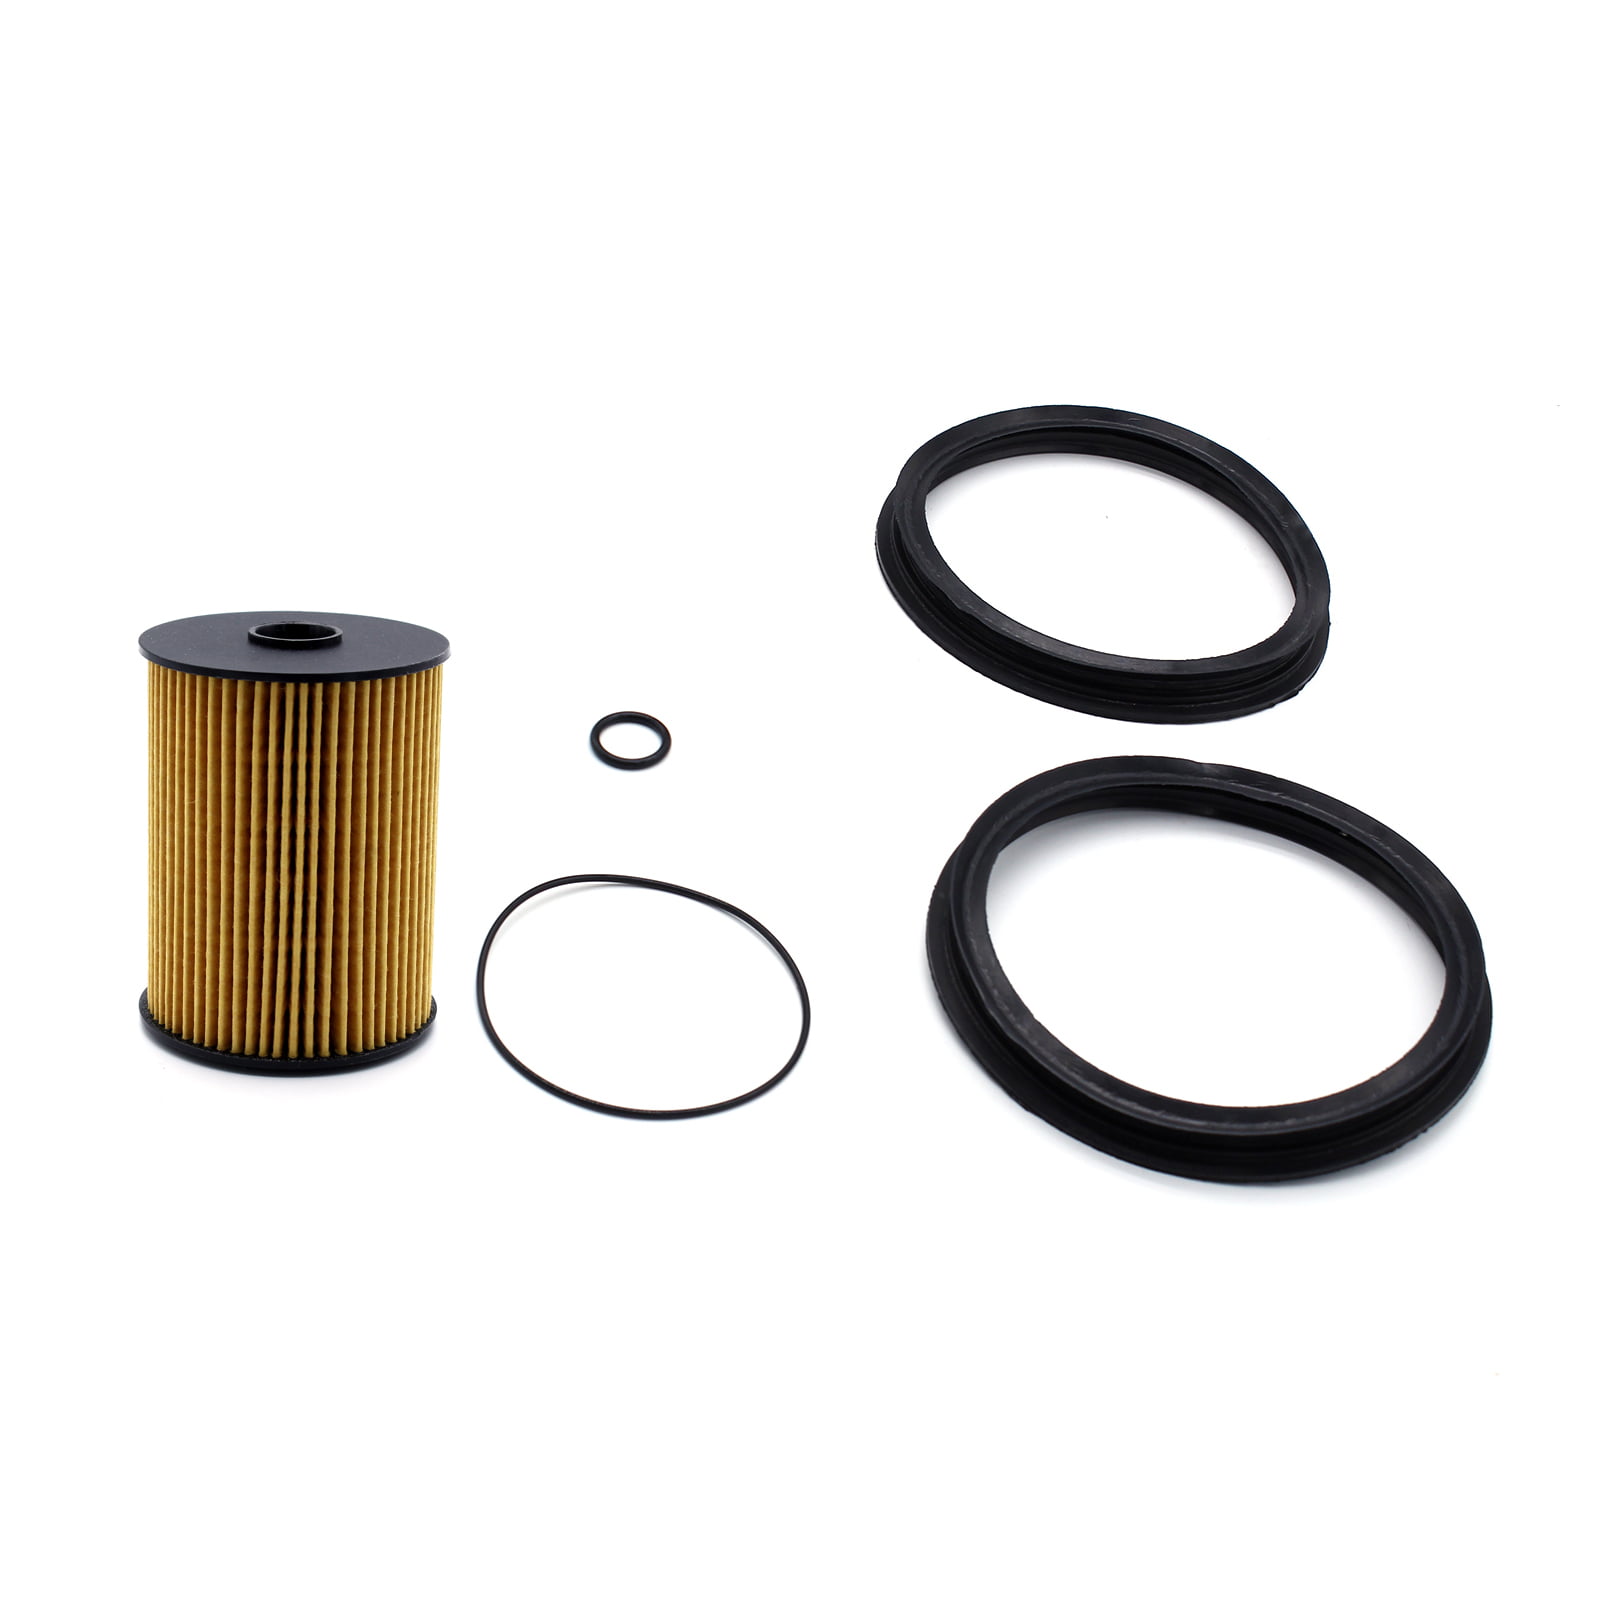 Fuel Filter Kit with O-Rings & Seals for 2002-2008 Mini Cooper R50 R52 R53 A898 16146757196 